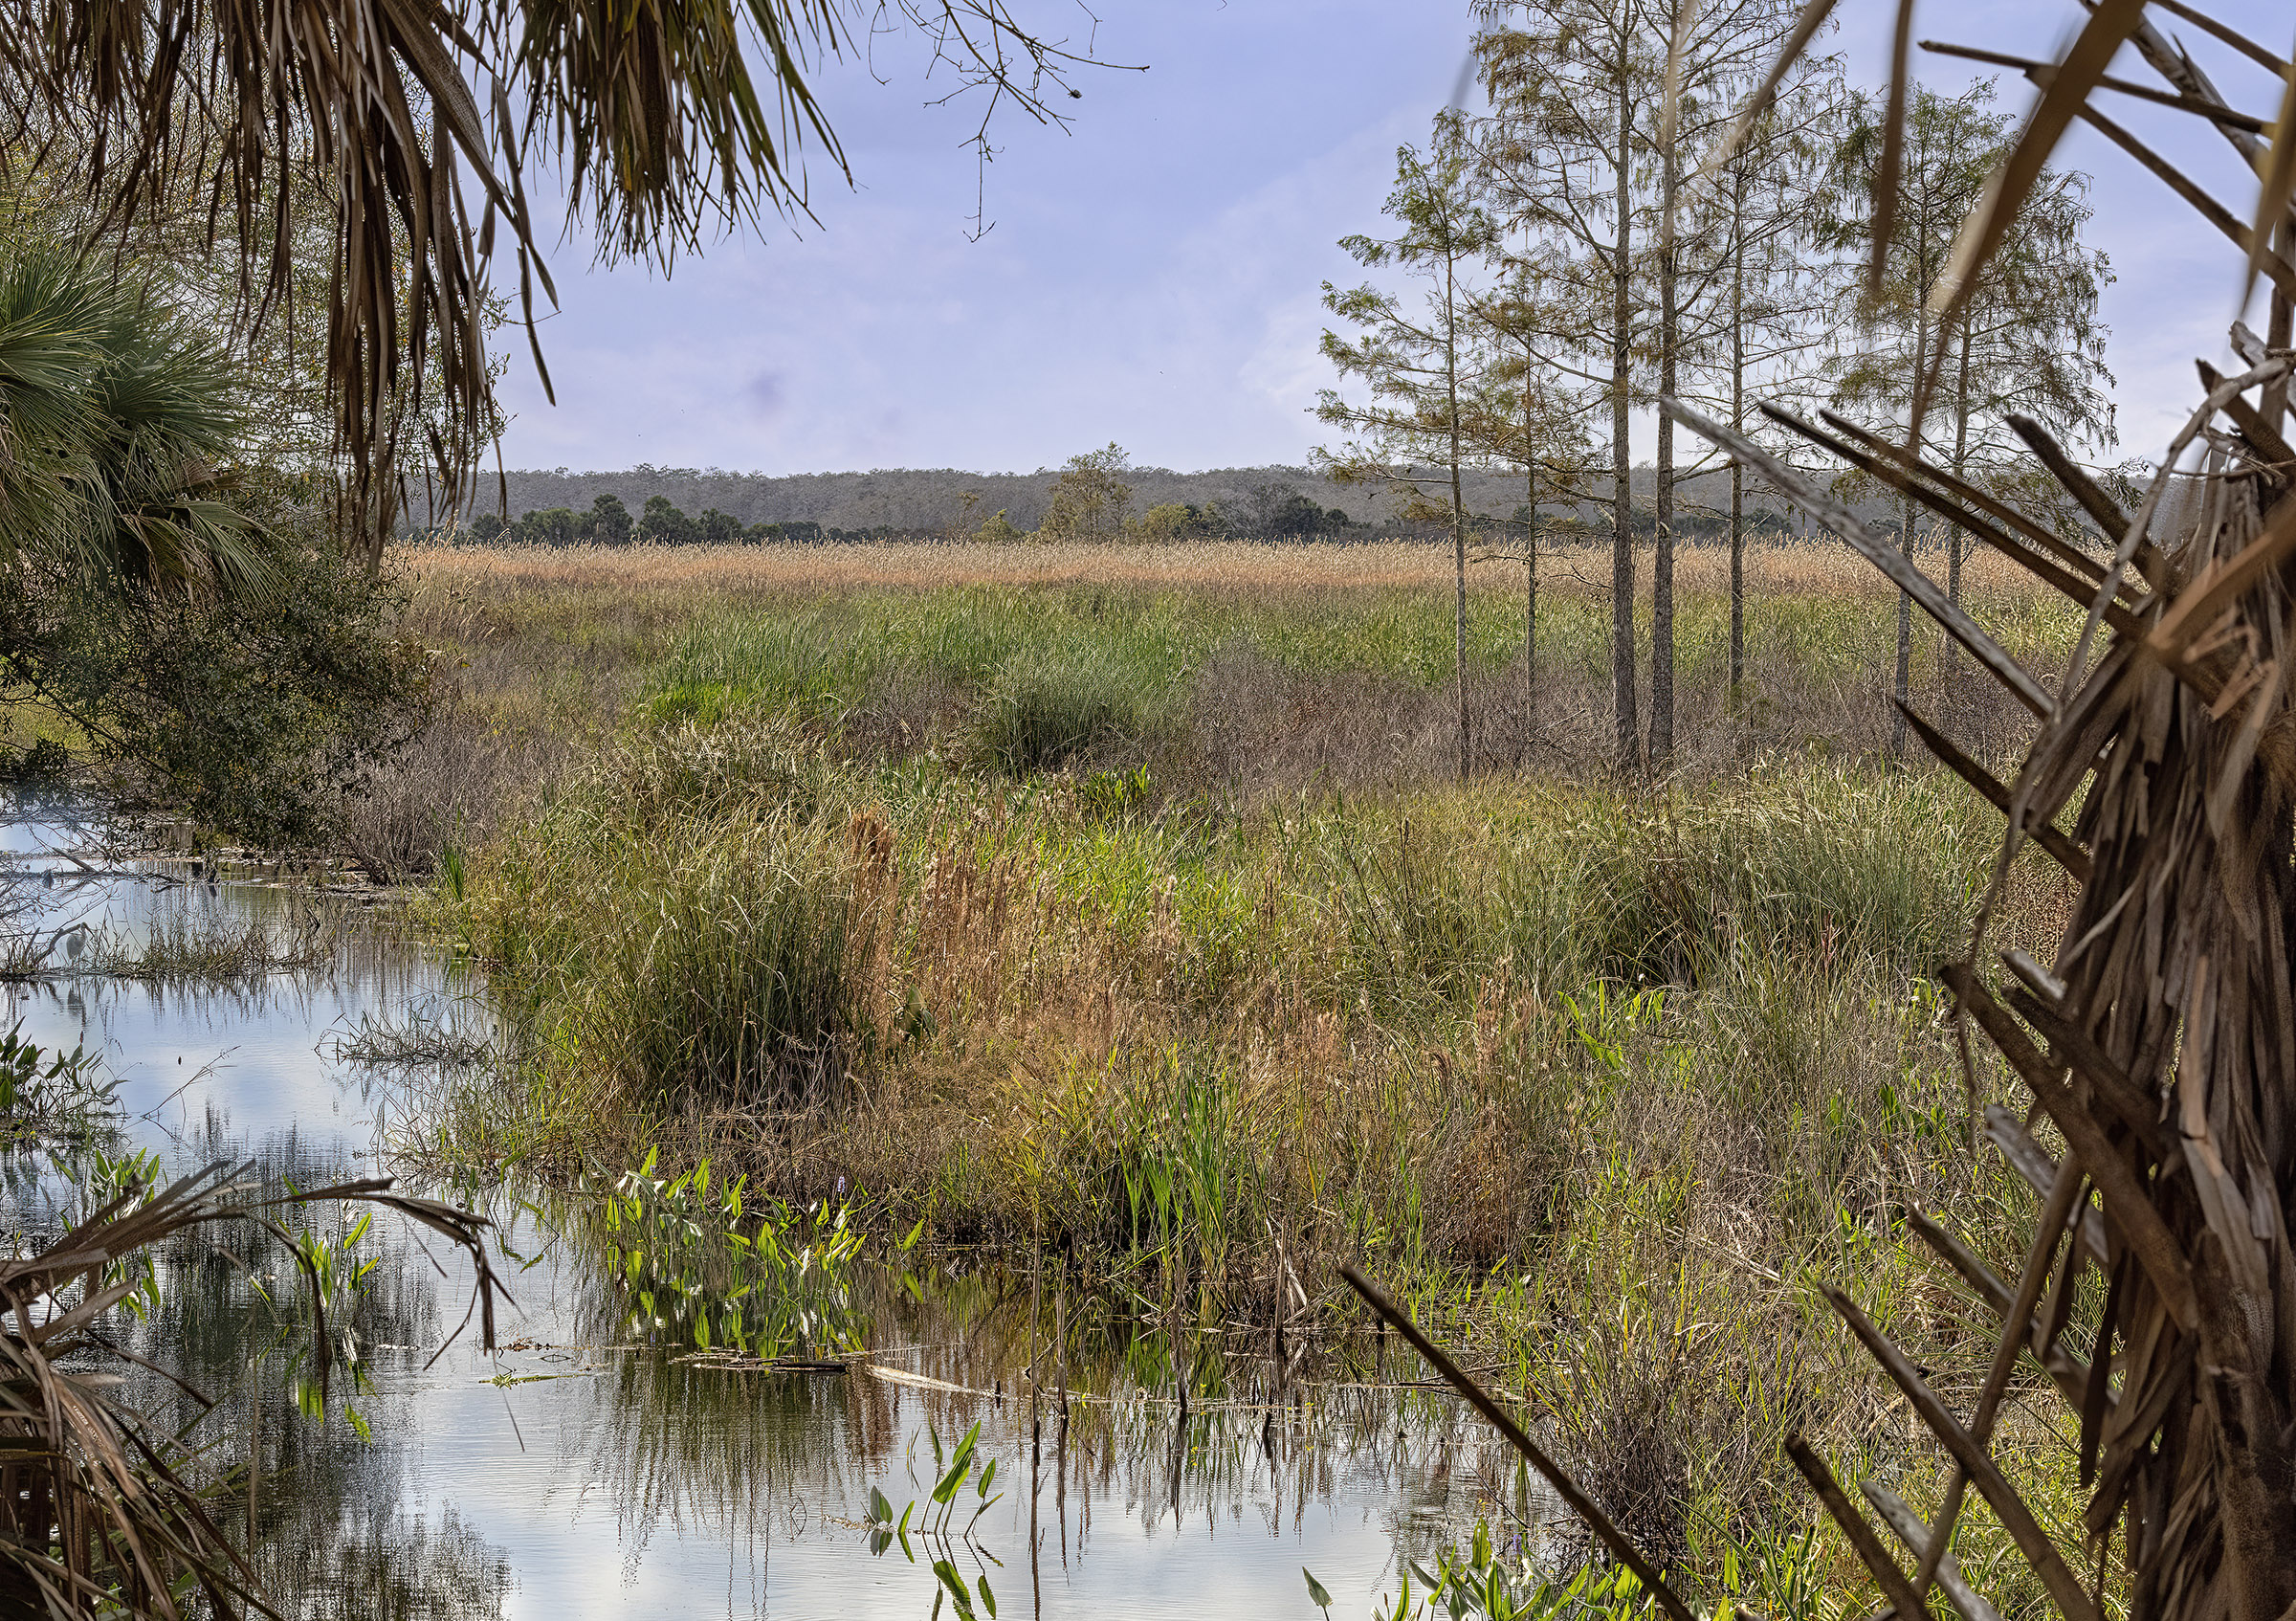 A view of a marsh landscape.